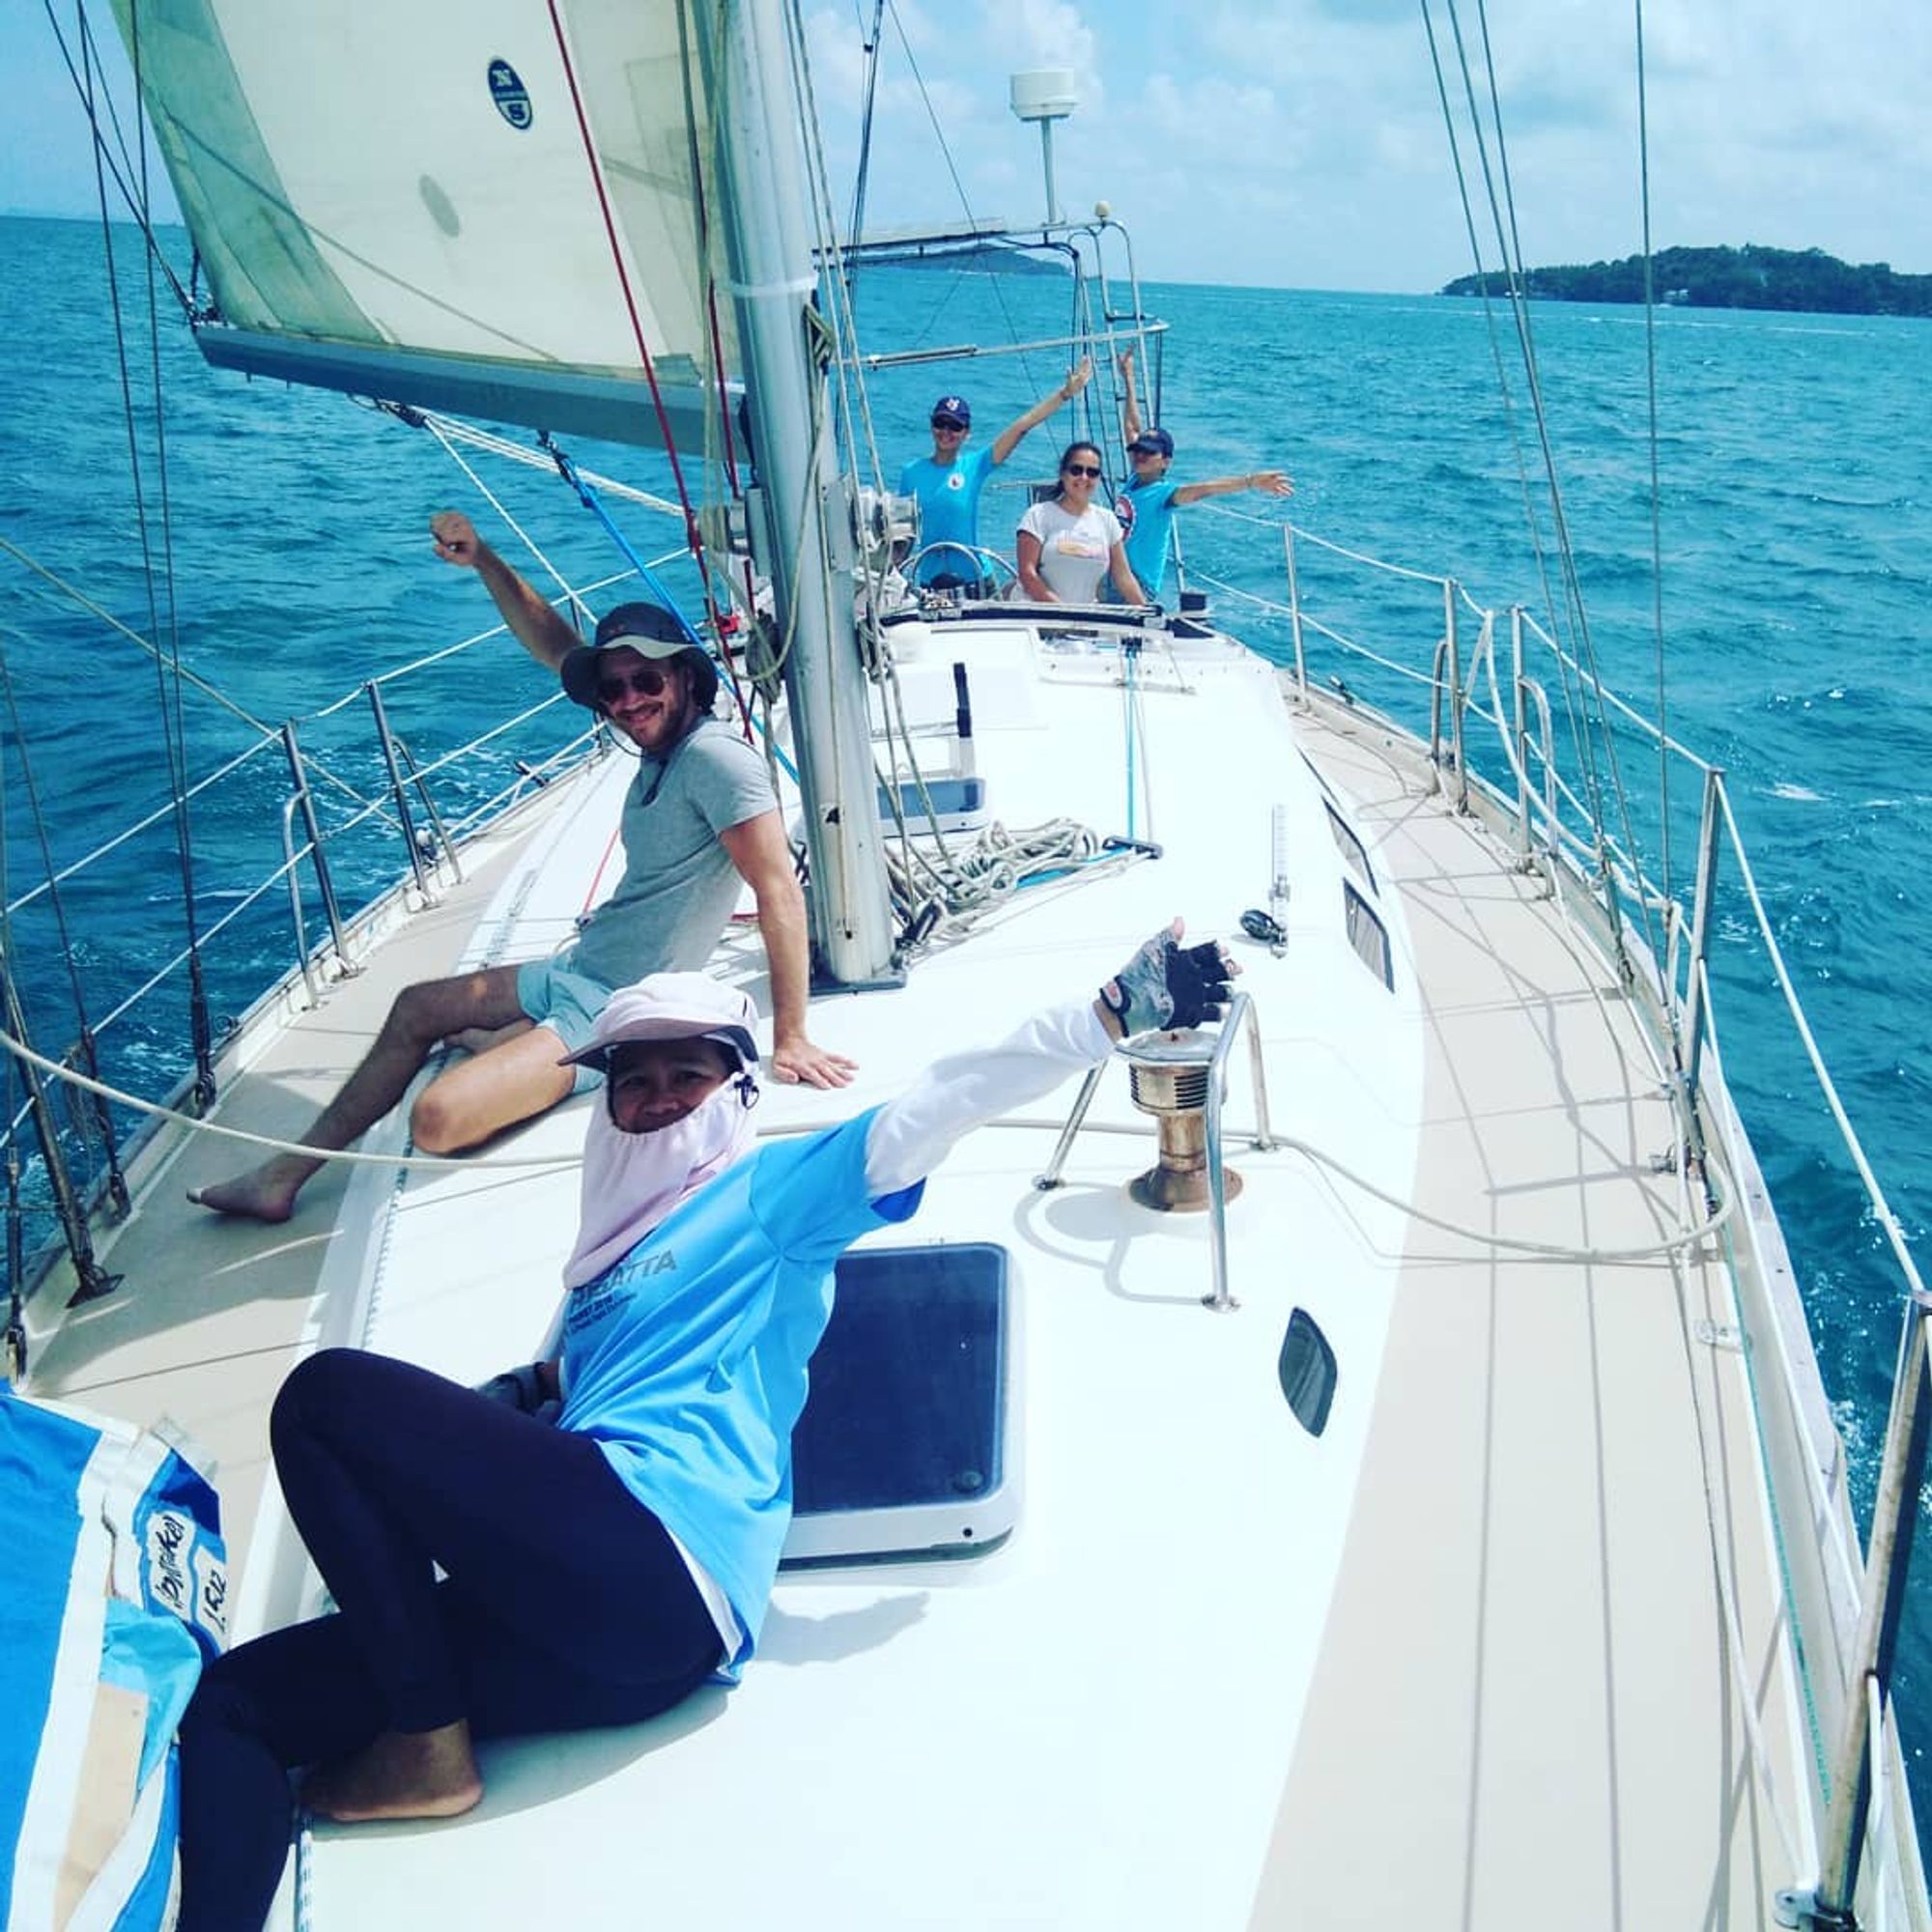 Learning to sail in Phuket